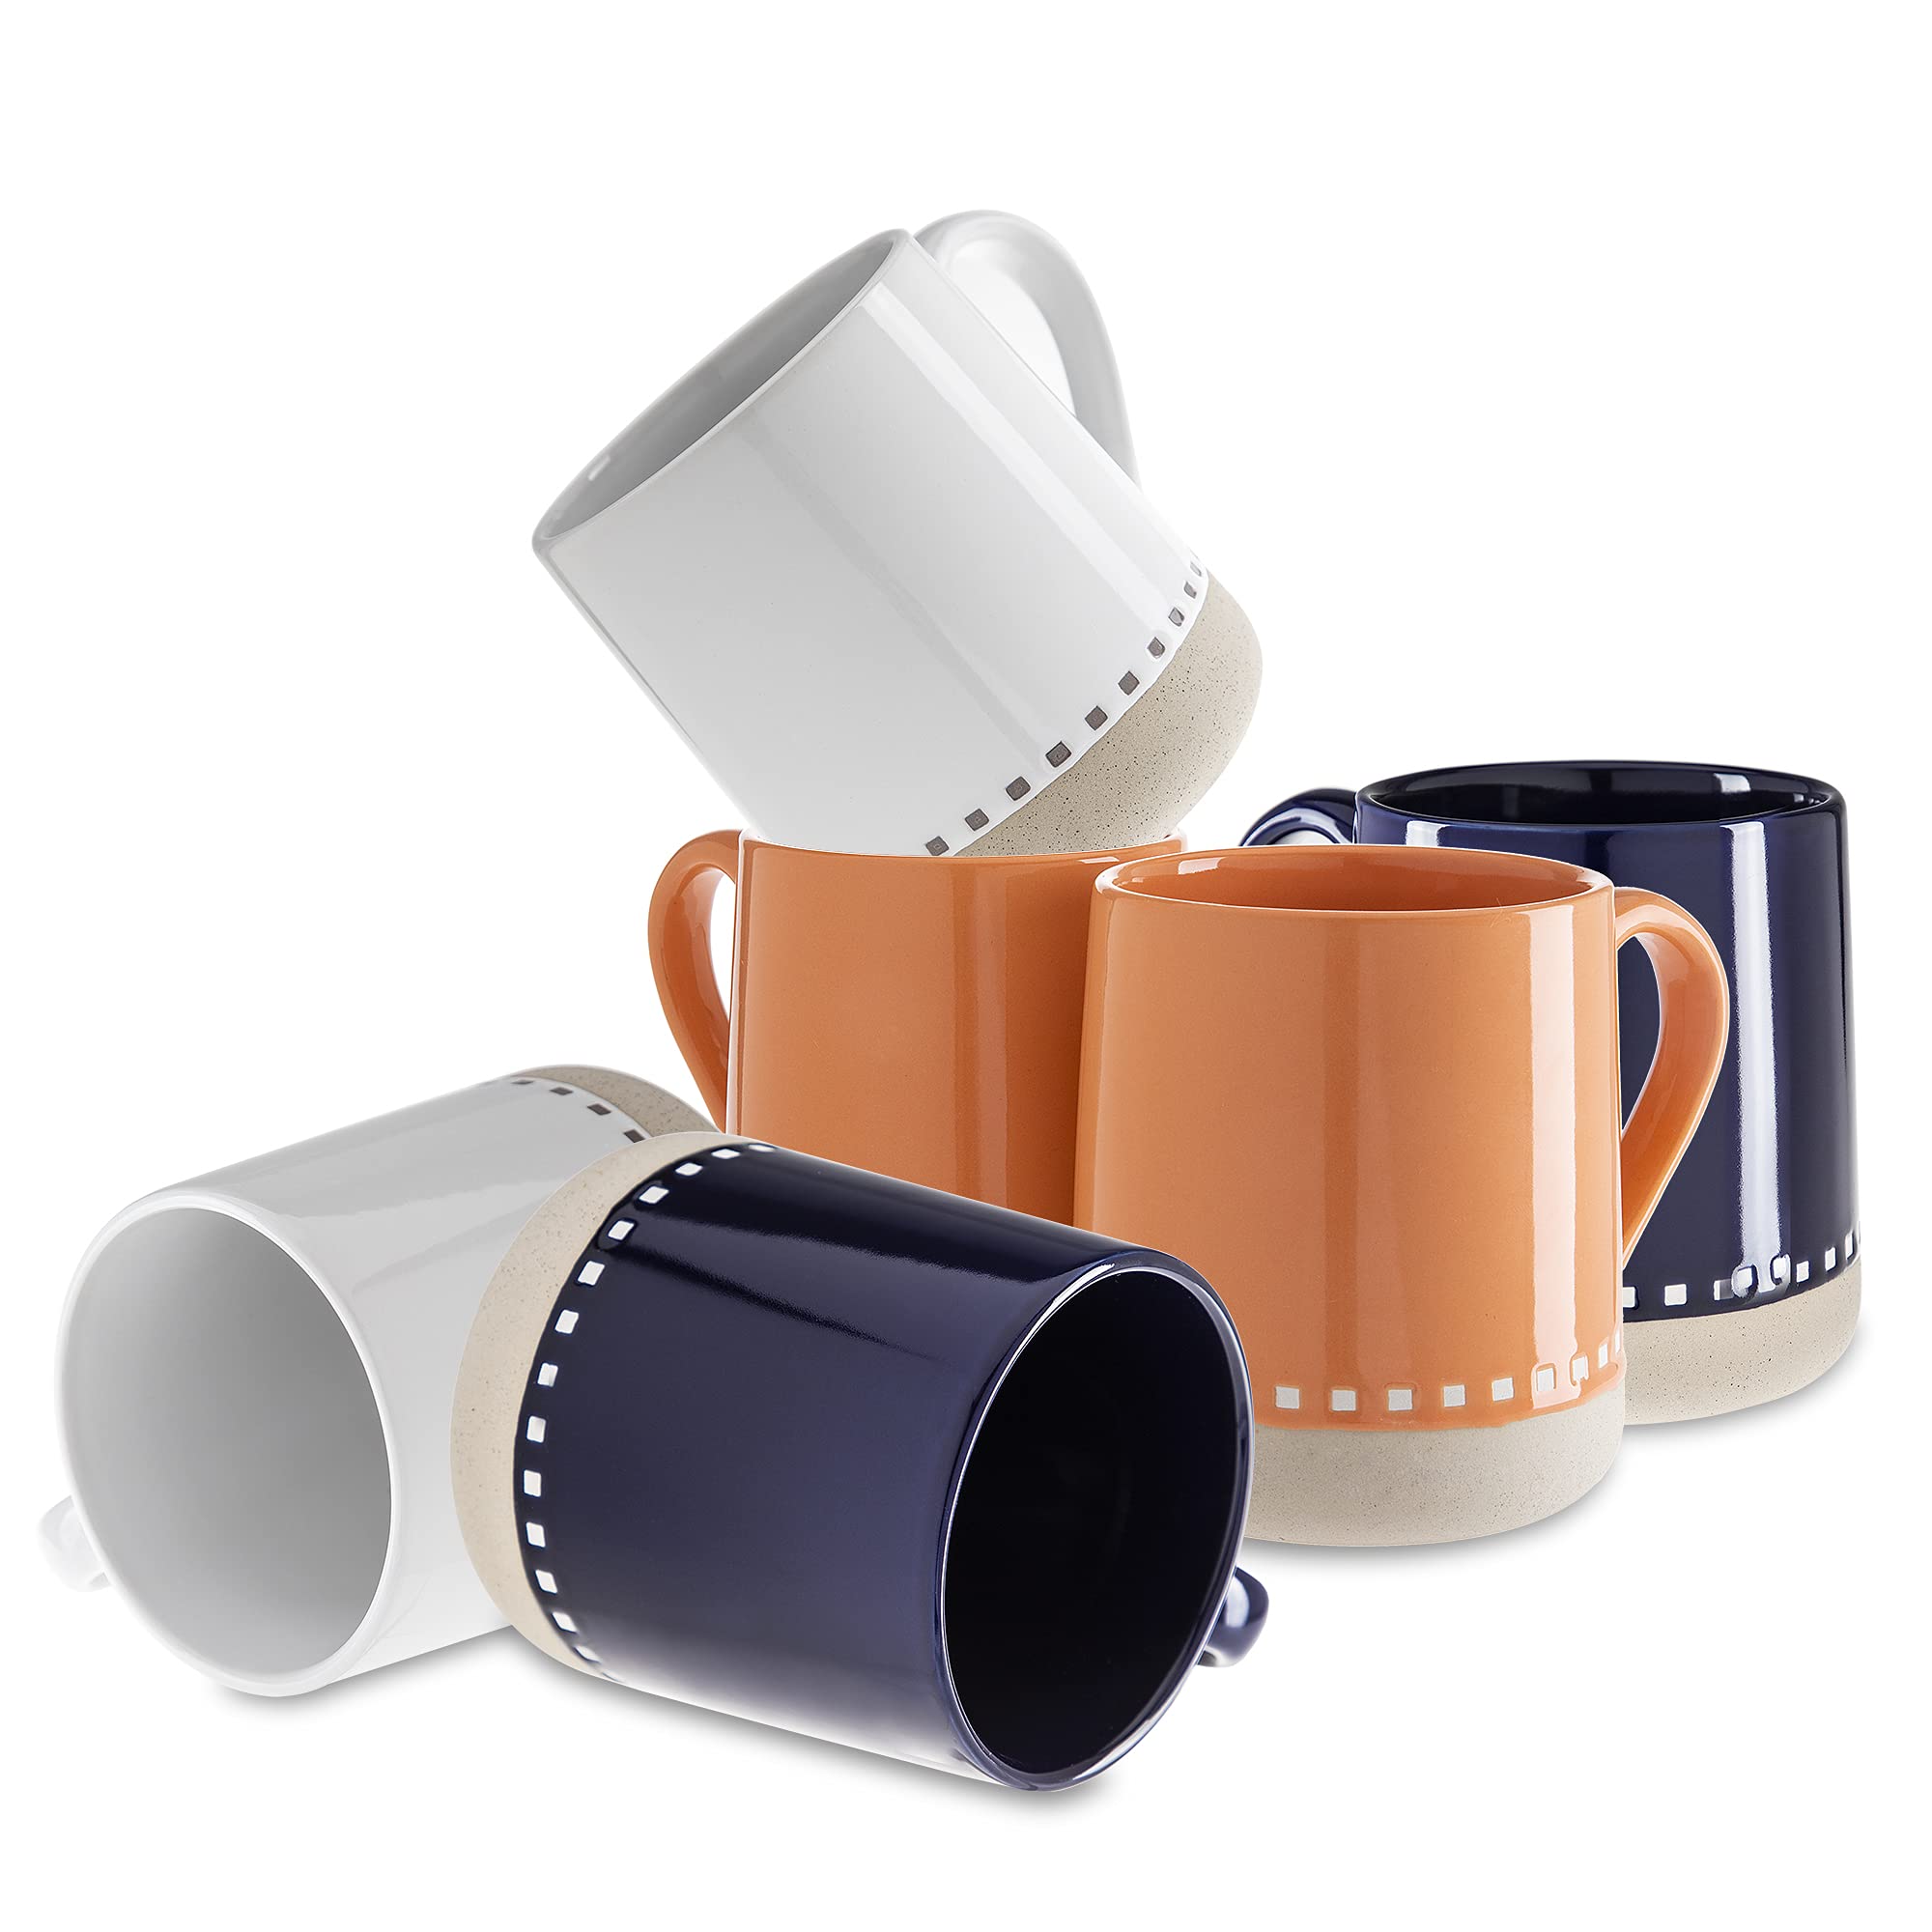 Heartland Hive Set of 6 Stoneware Coffee Mugs- Bright and Colorful, Stylish Coffee Cups, Mugs for Tea, Latte, and Hot Chocolate, 18 oz, (Navy, White, Orange)  - Like New